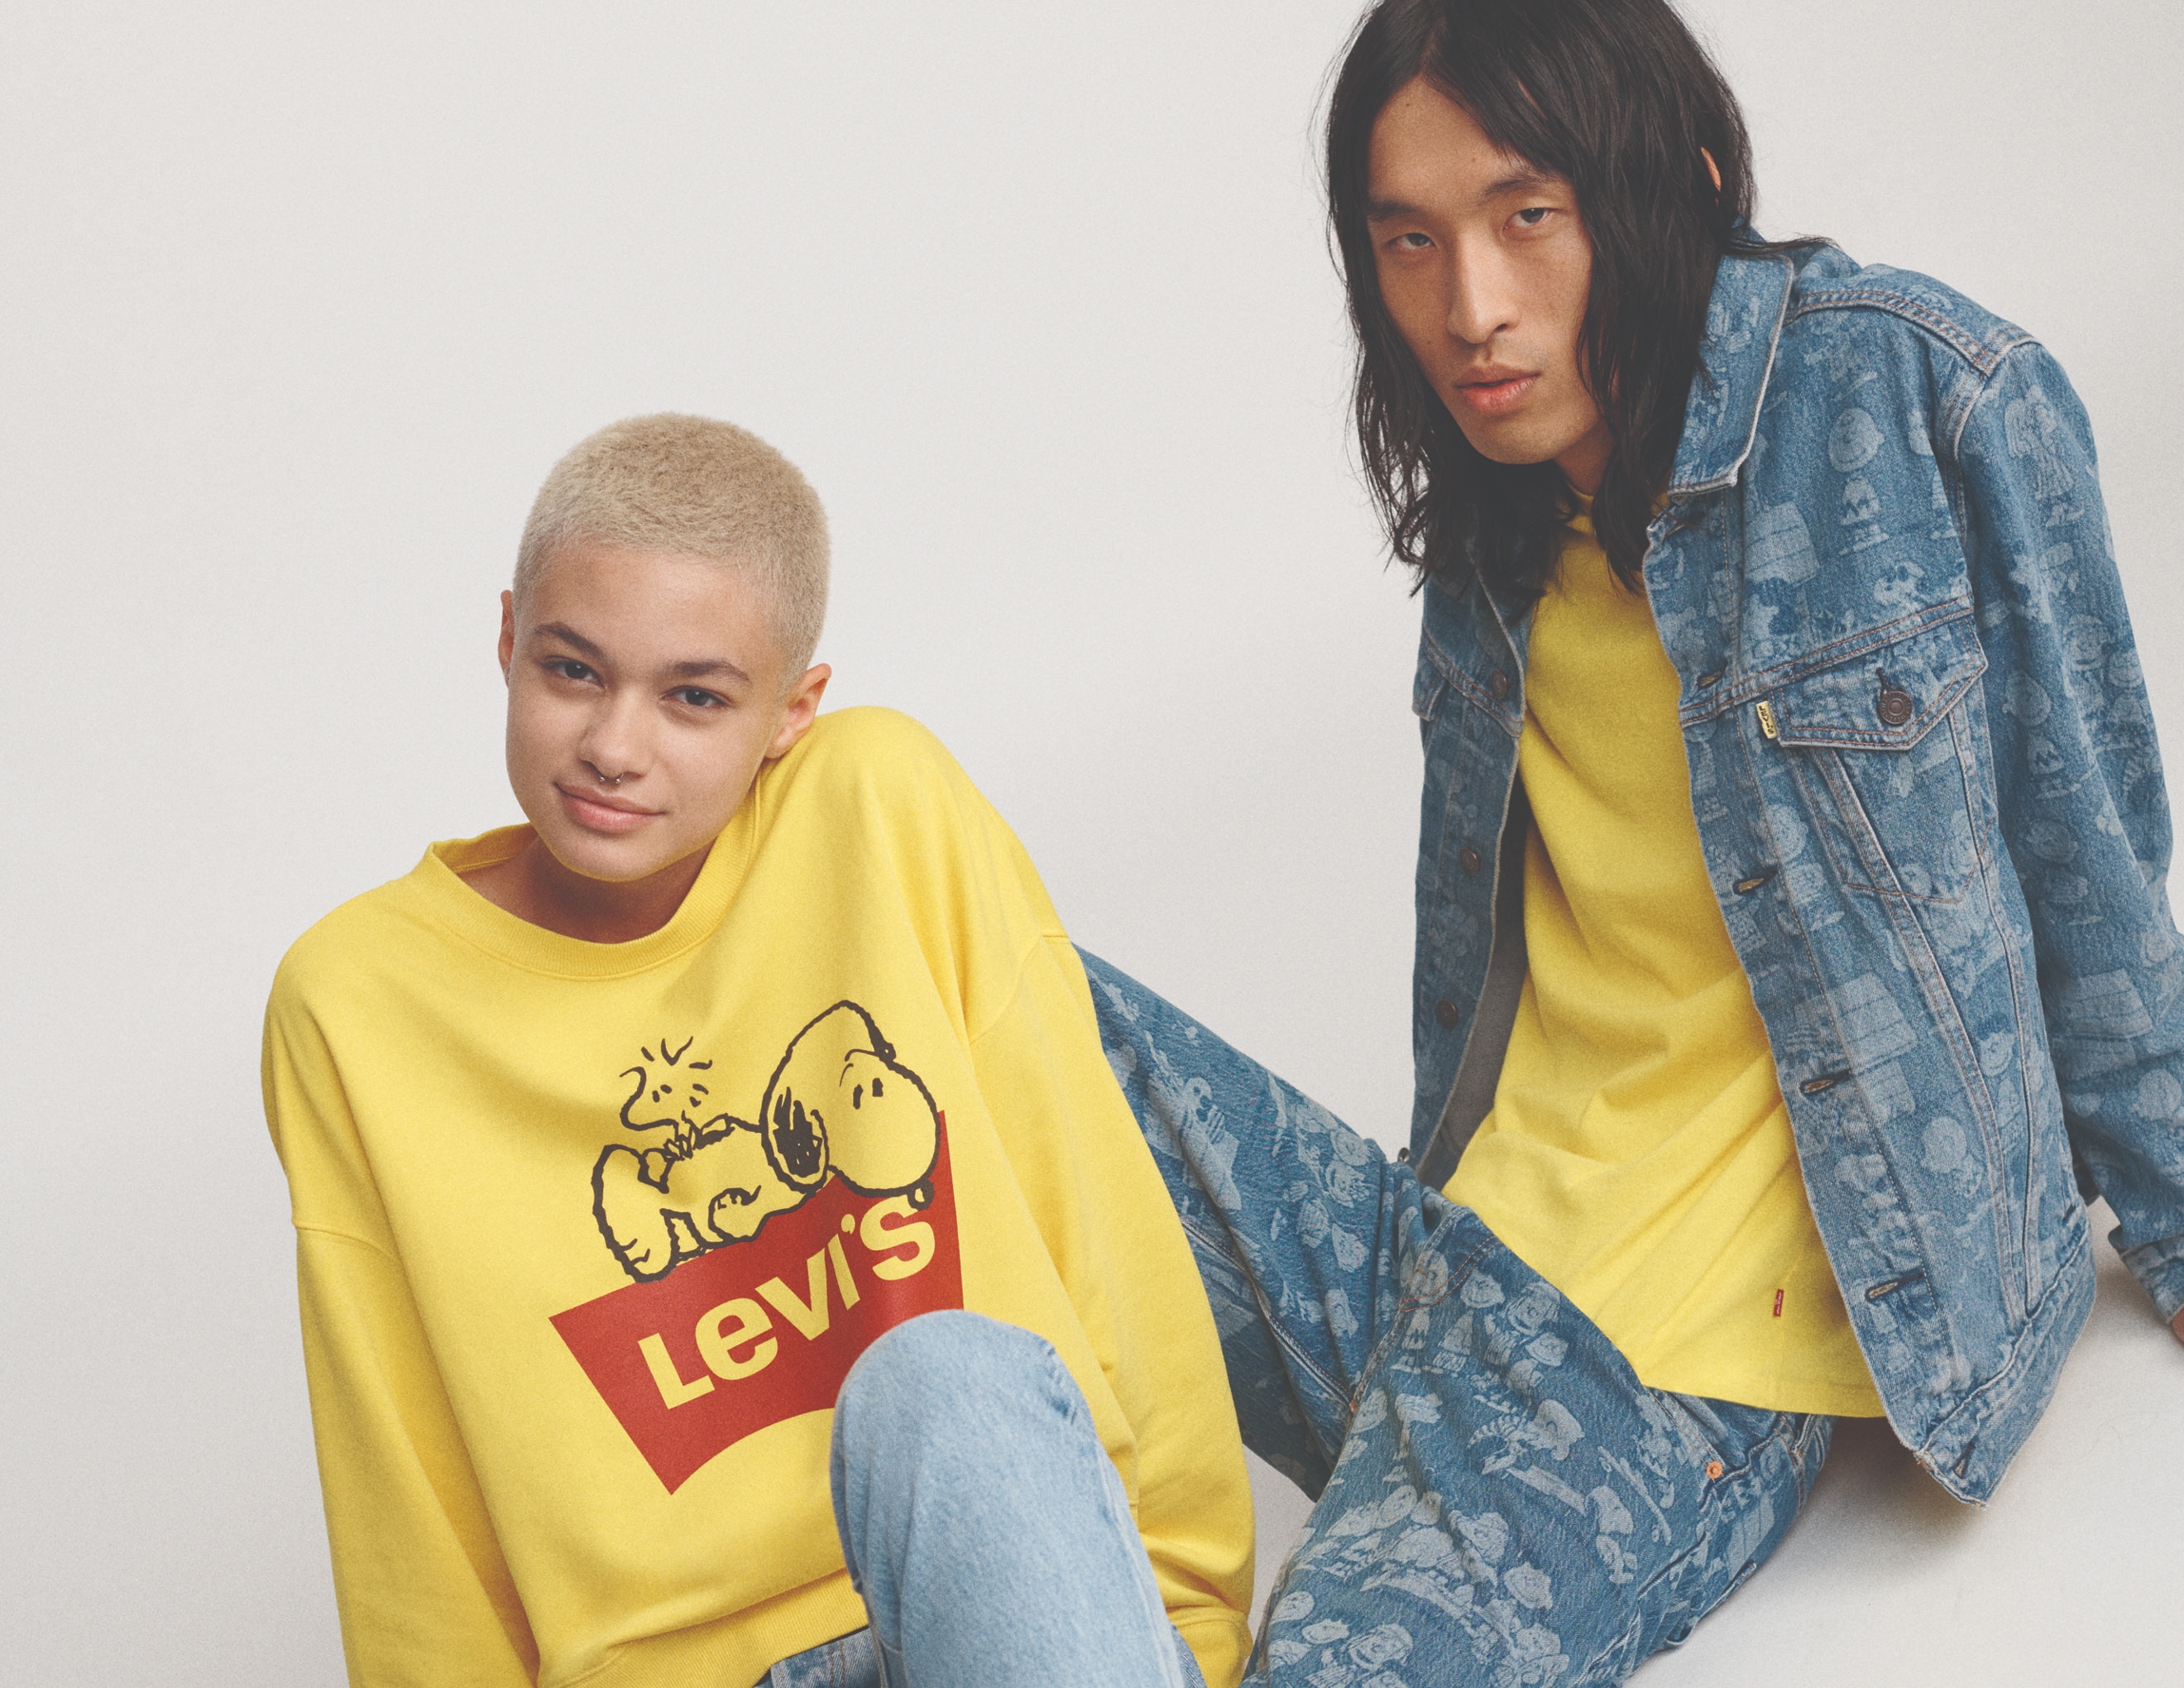 Levi's Stitches New Collab with Peanuts | License Global